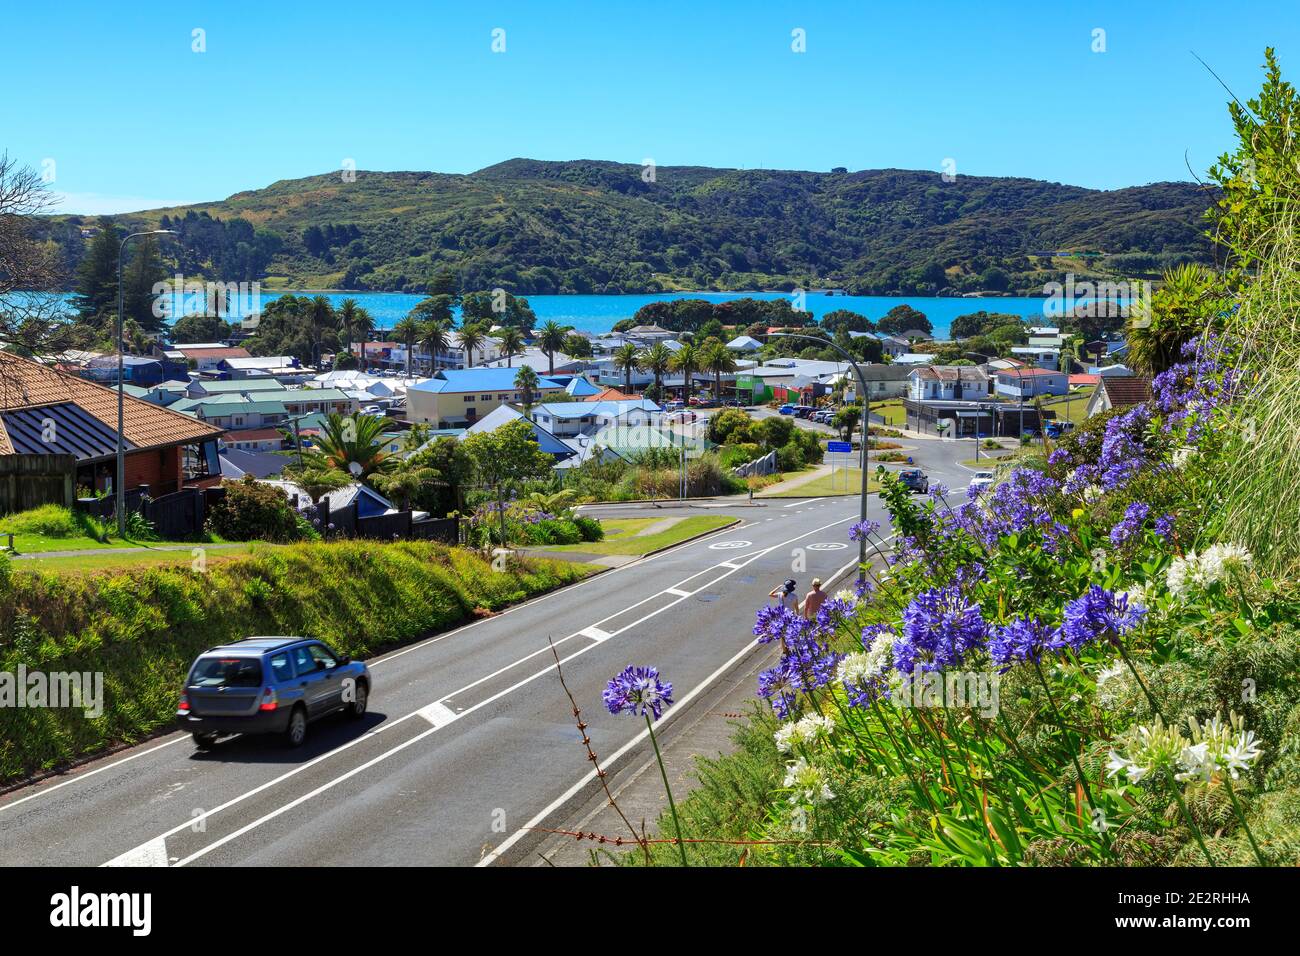 The road into Raglan, a small seaside town in New Zealand and a popular summer destination for surfers and holidaymakers Stock Photo